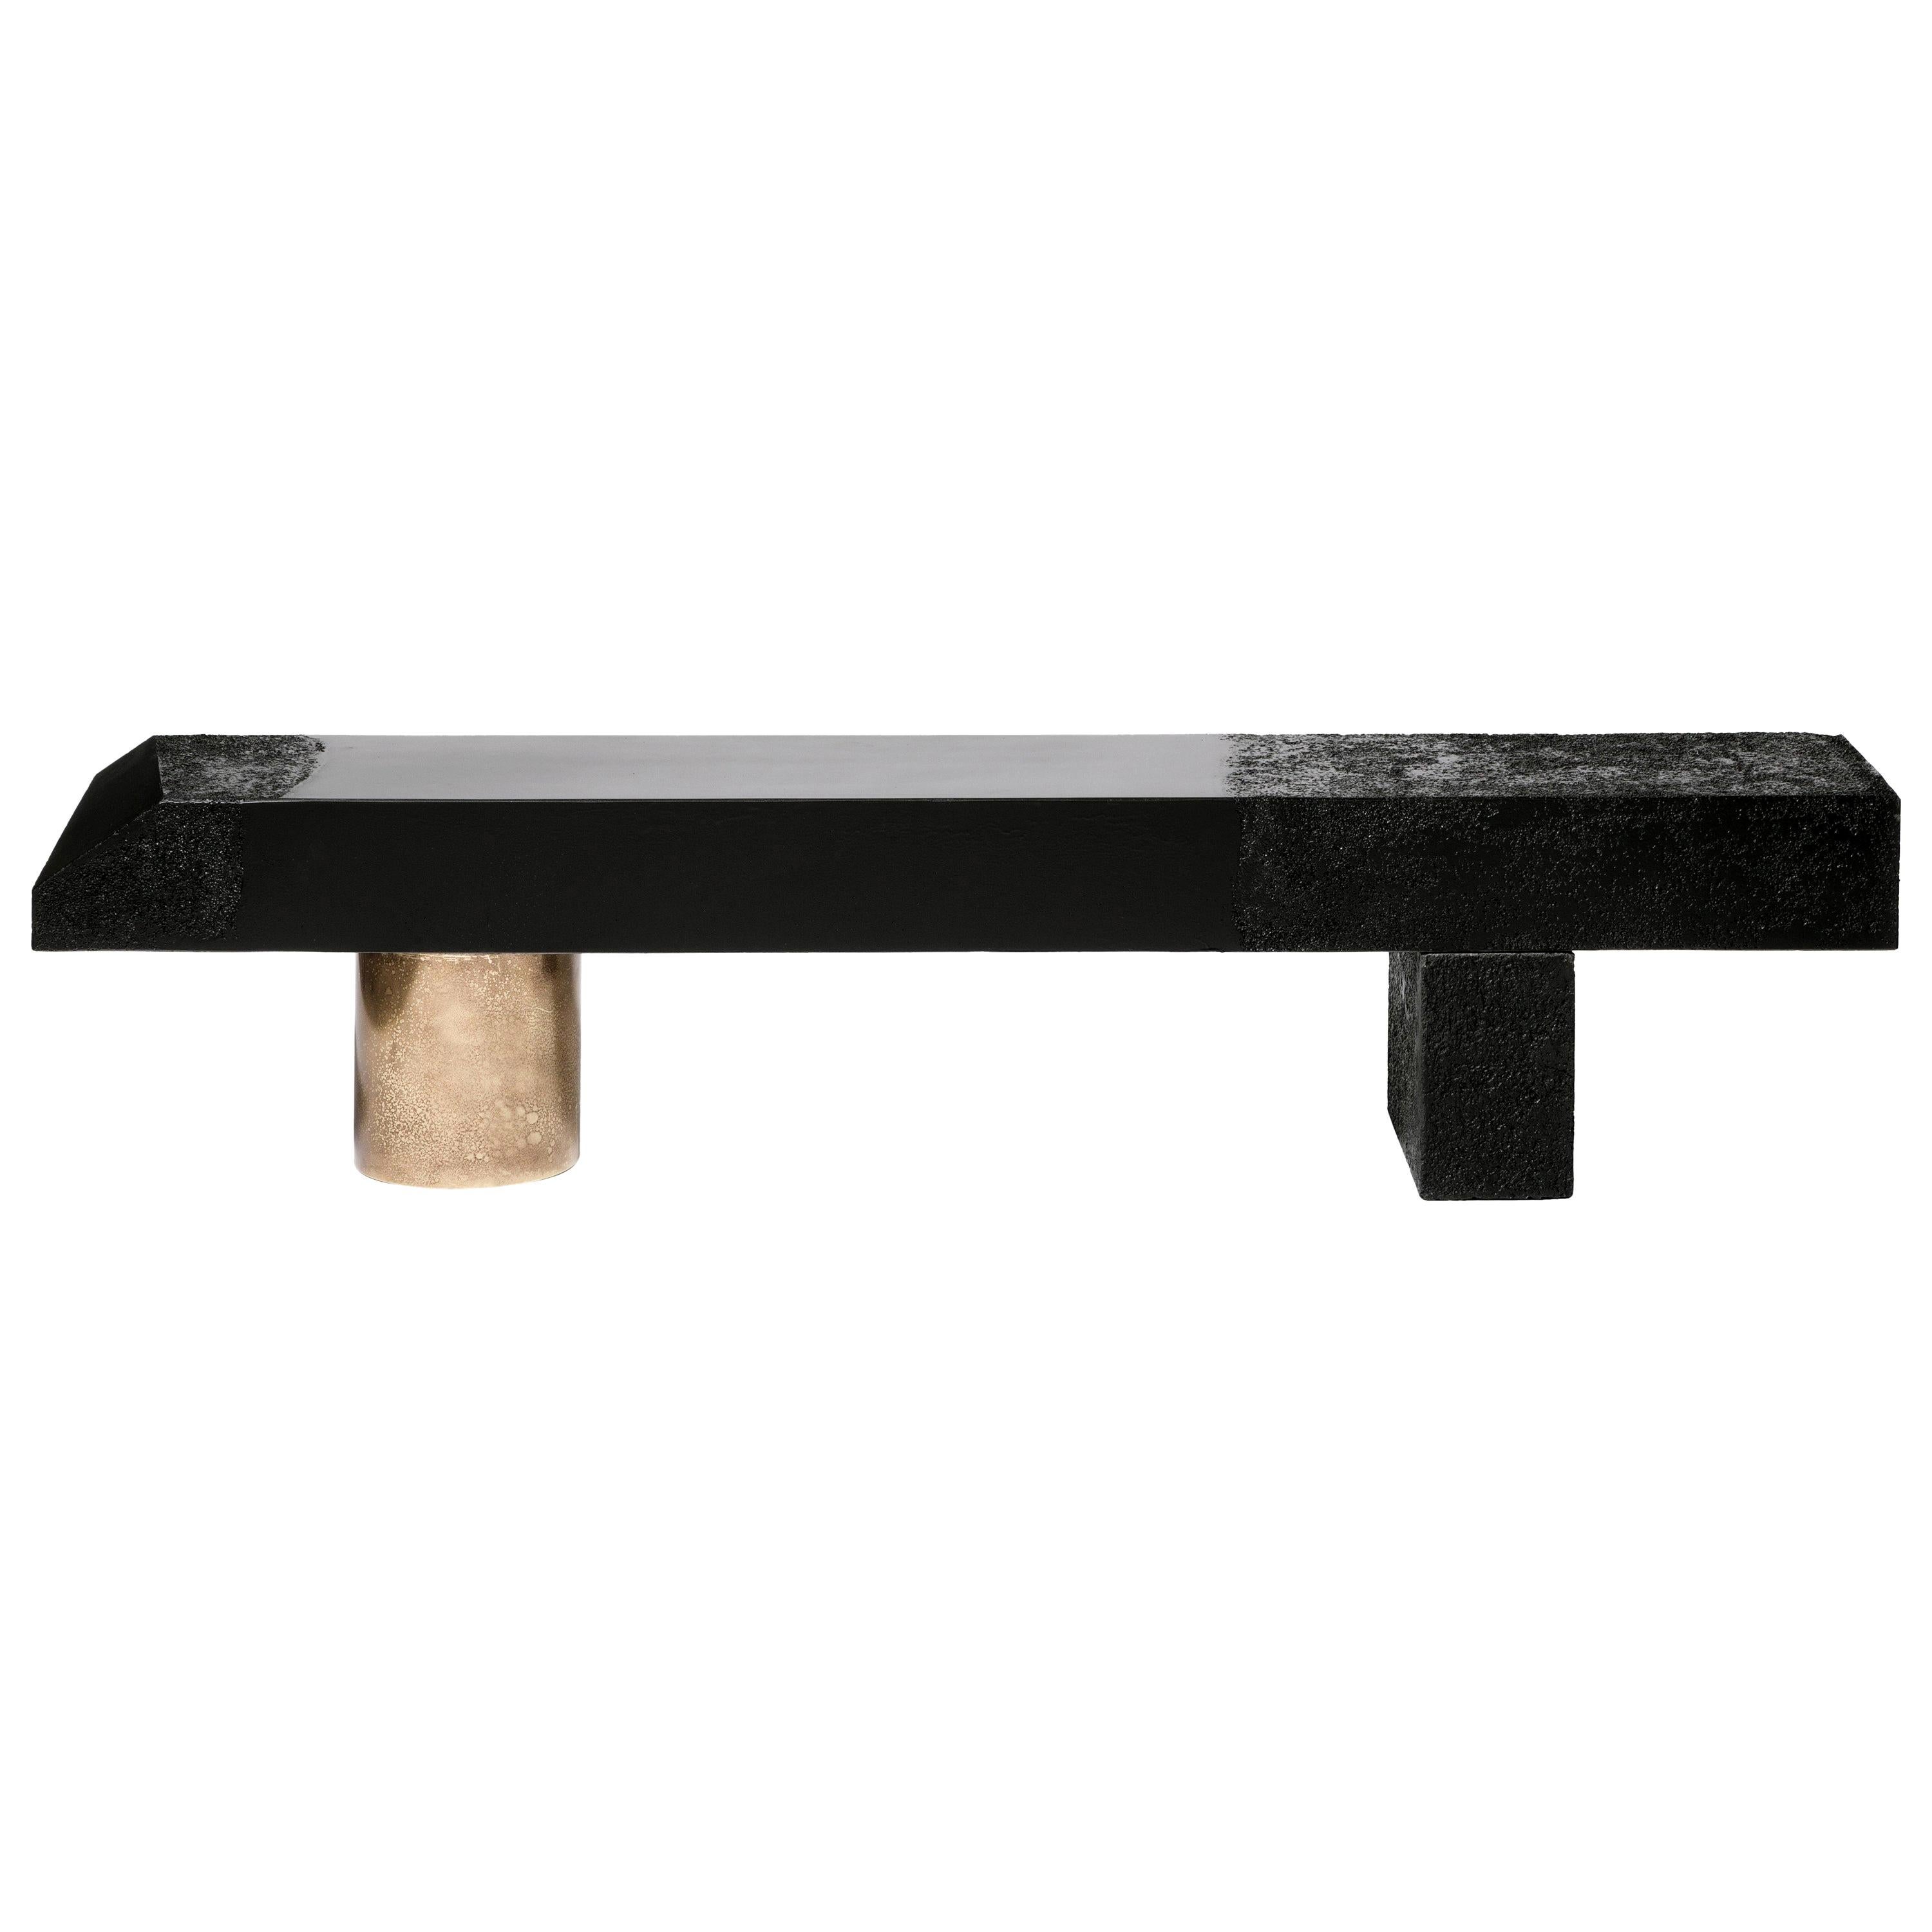 Rive Bench Small by Draga&Aurel Cement and Bronze, 21st Century For Sale